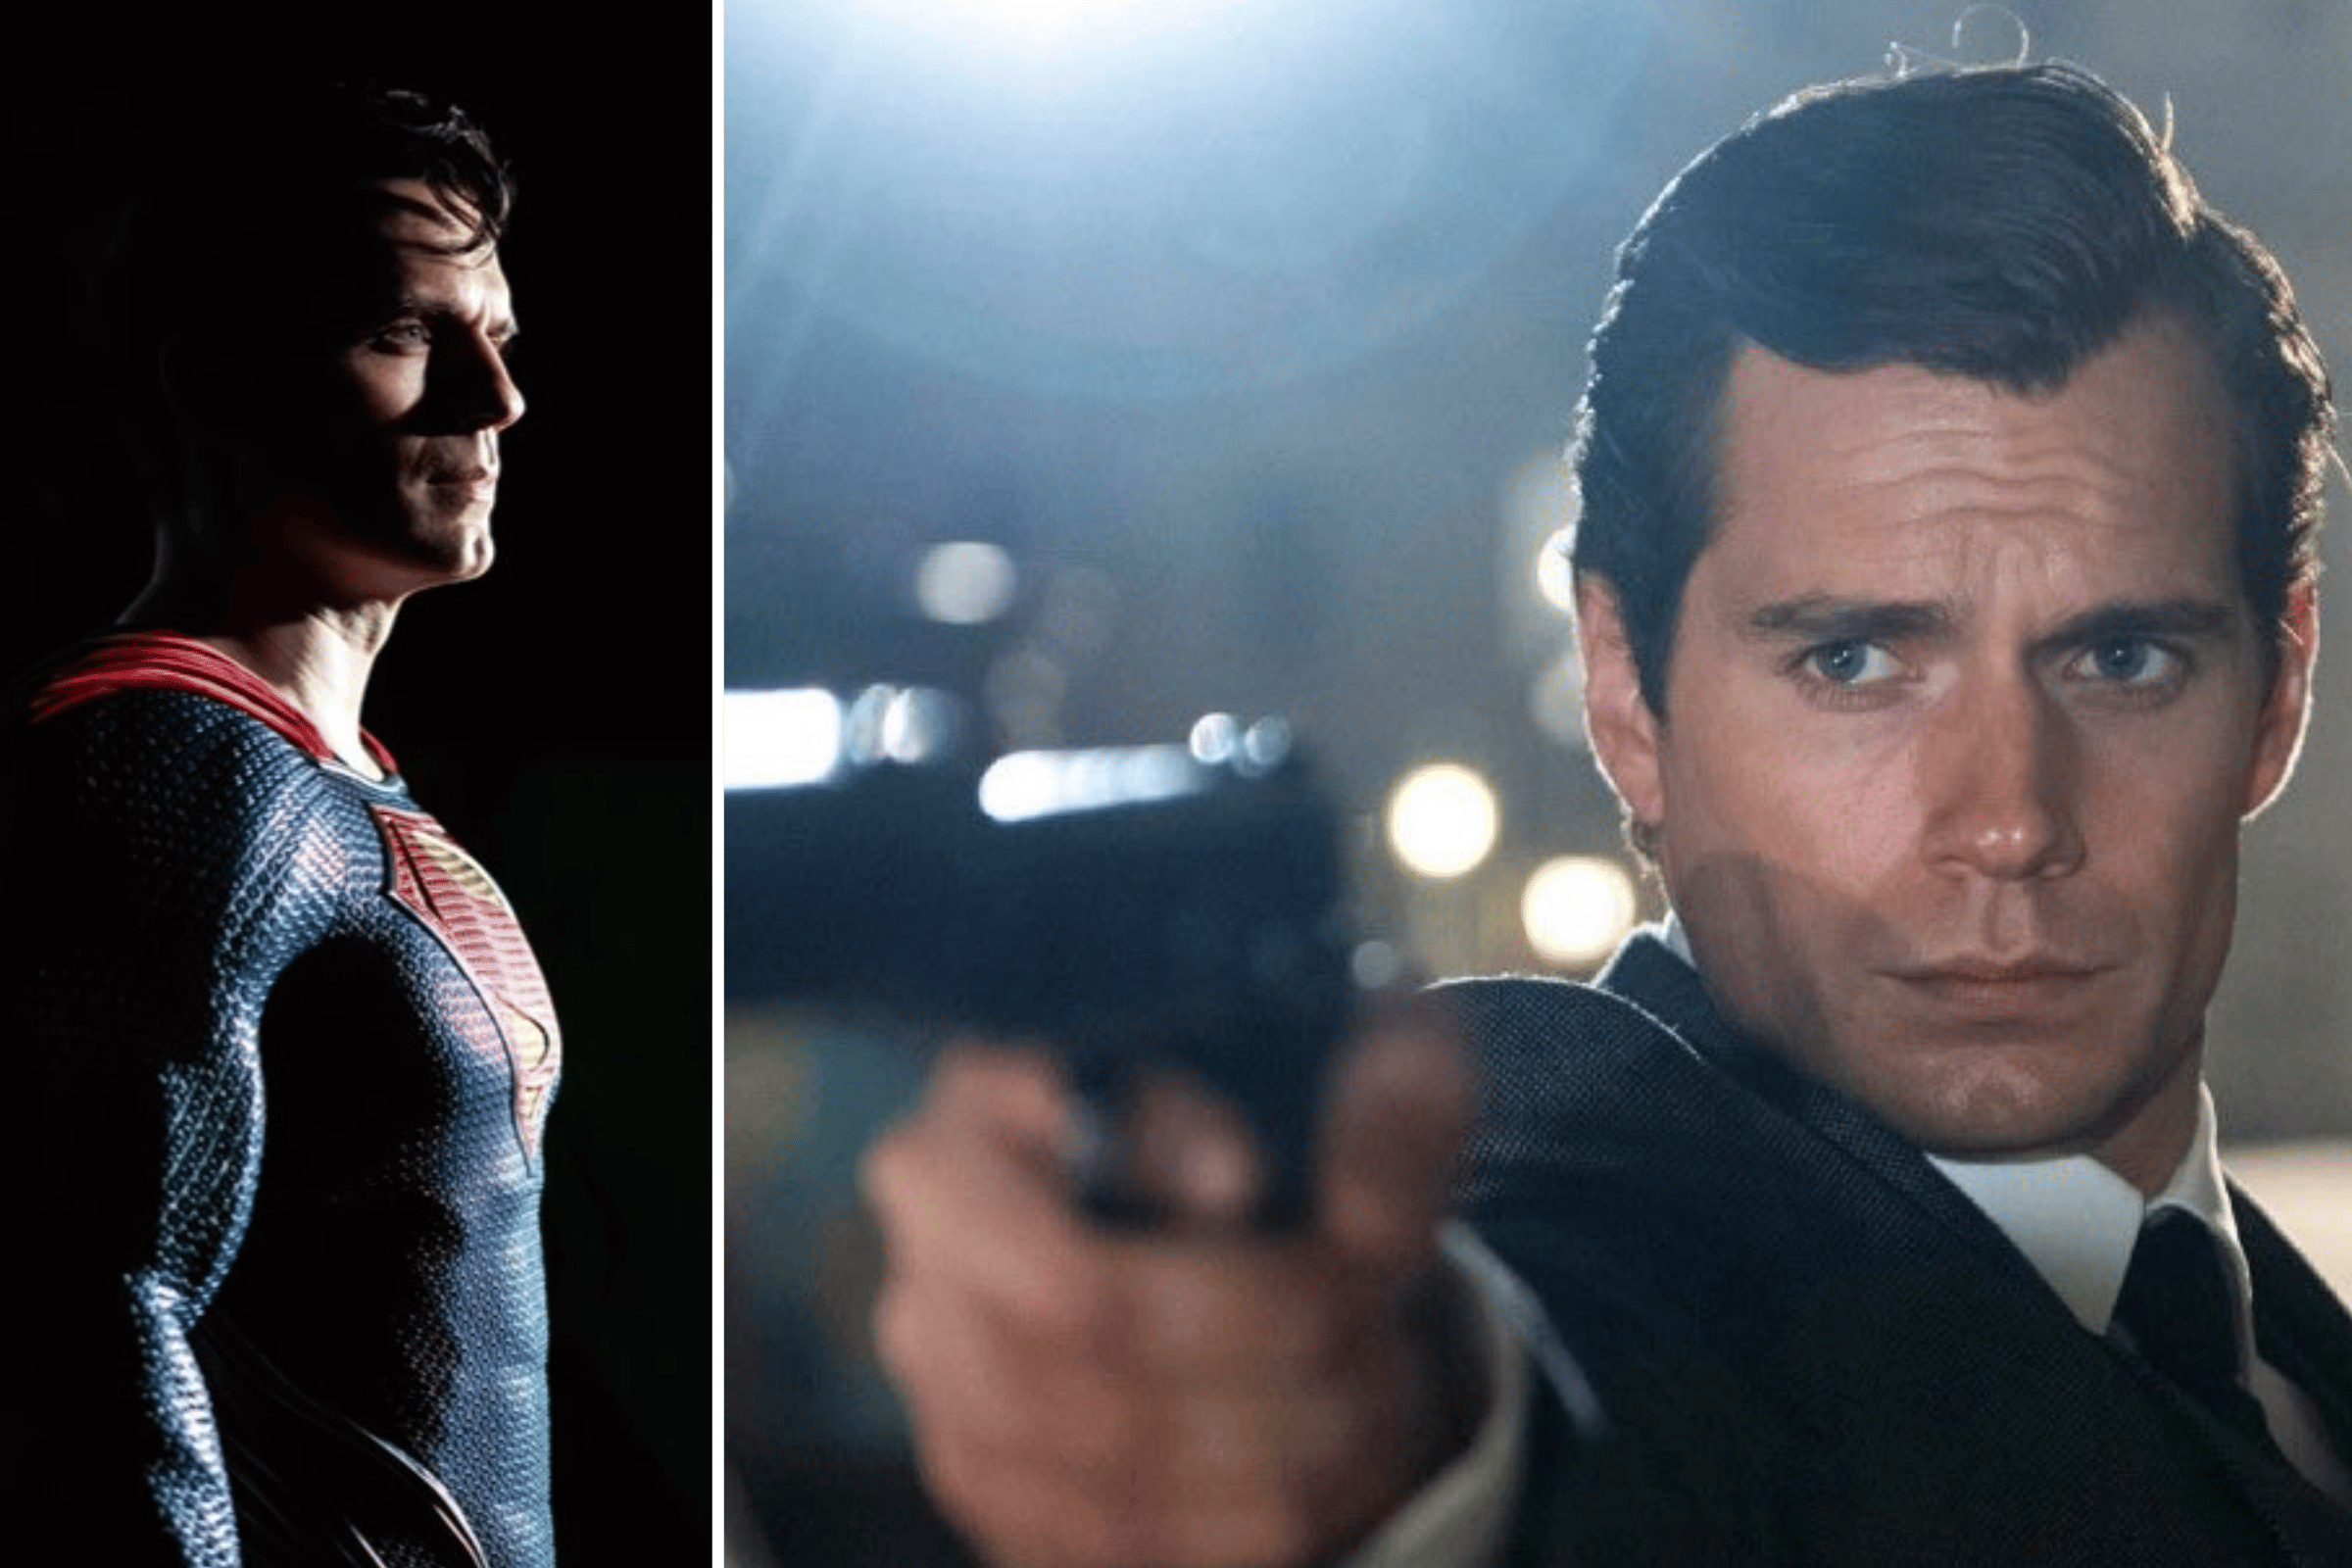 How's Henry Cavill's Superman Future Looking These Days? Here's The Latest